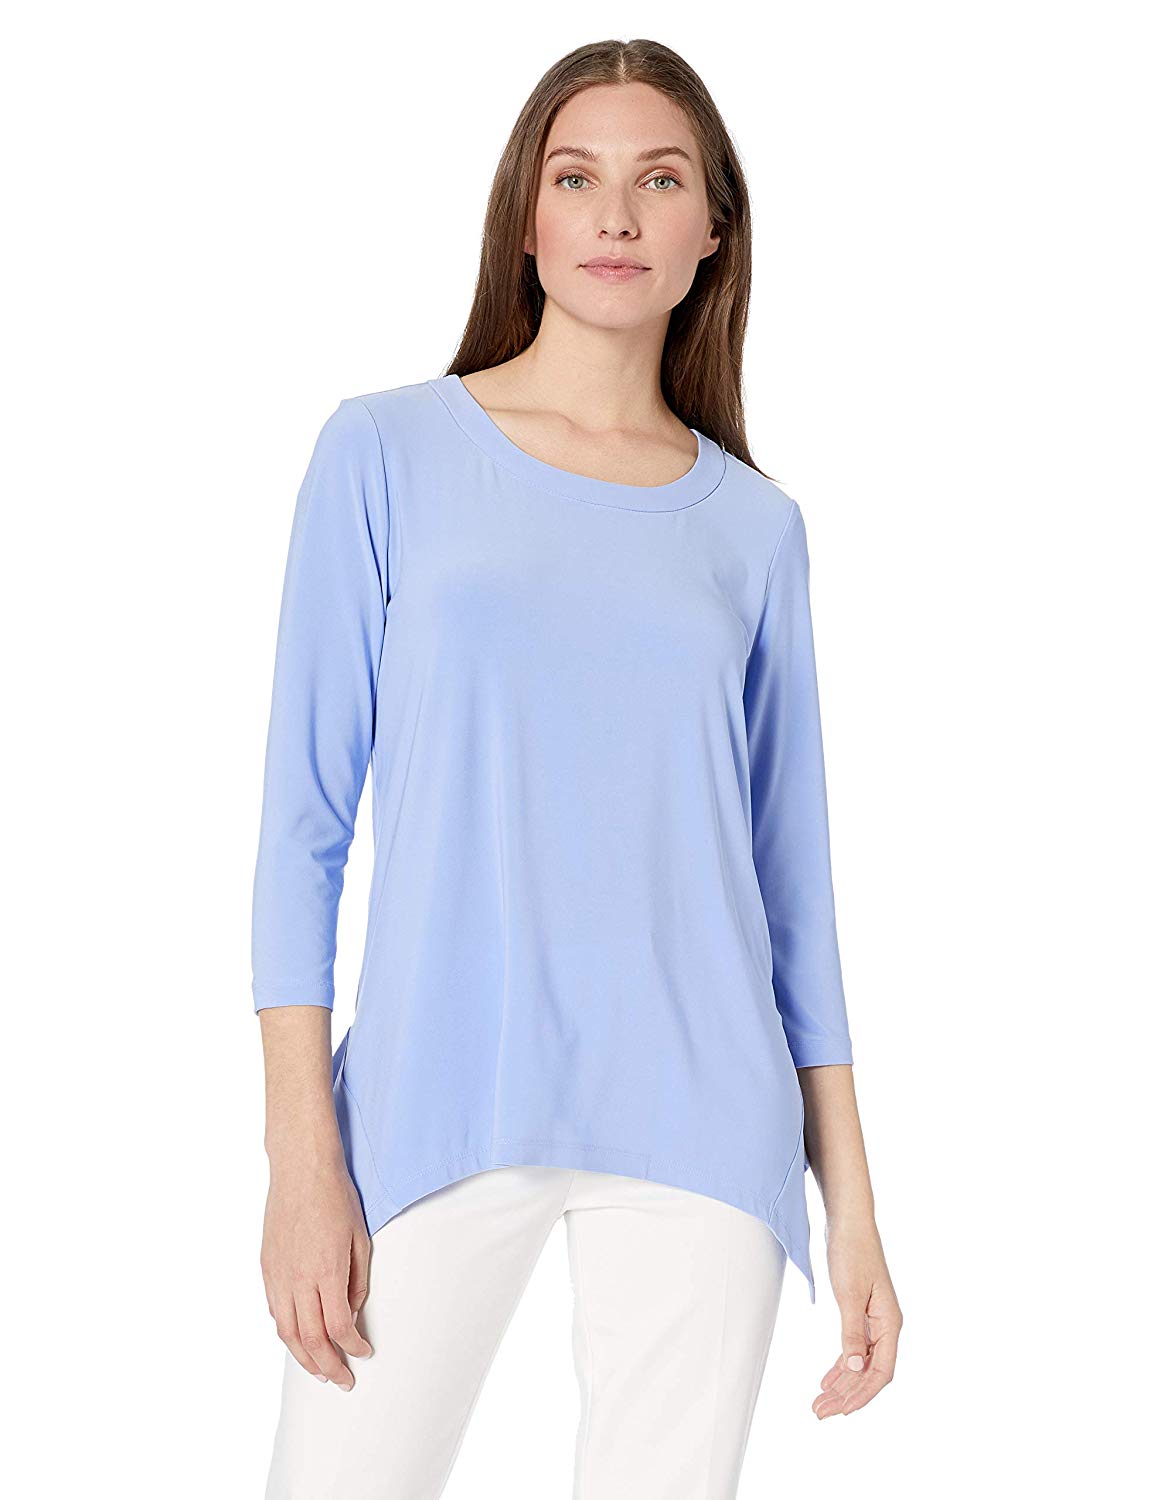 Anne Klein Women's Sharkbite TOP with Sideseam Insets,, High Sky, Size ...